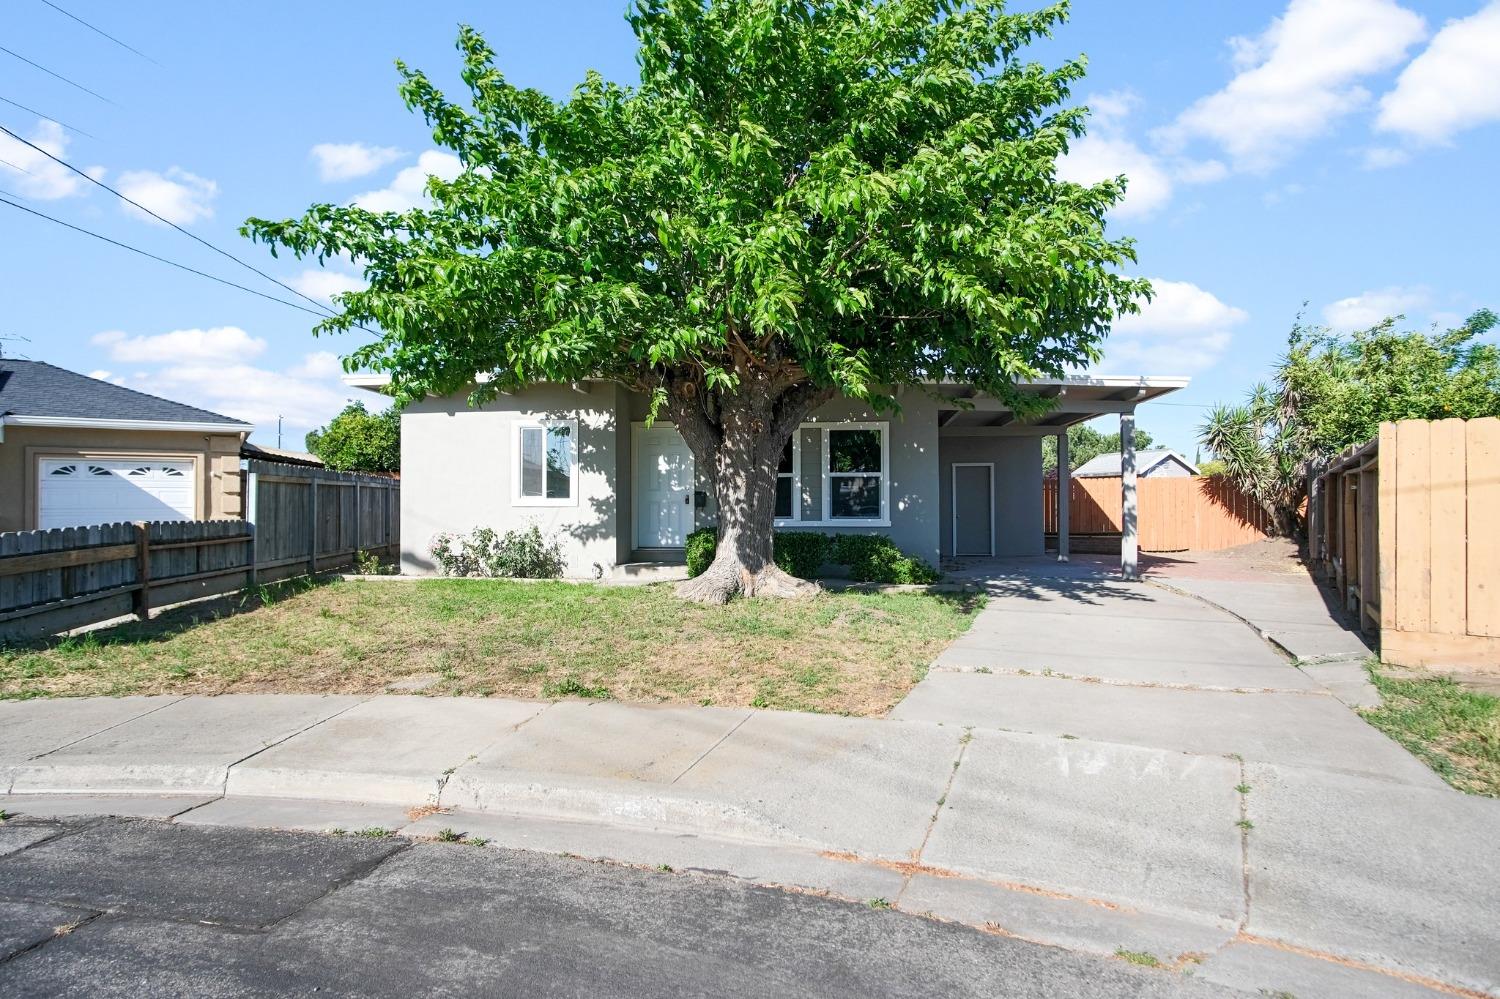 Photo of 212 N Veach Ave in Manteca, CA